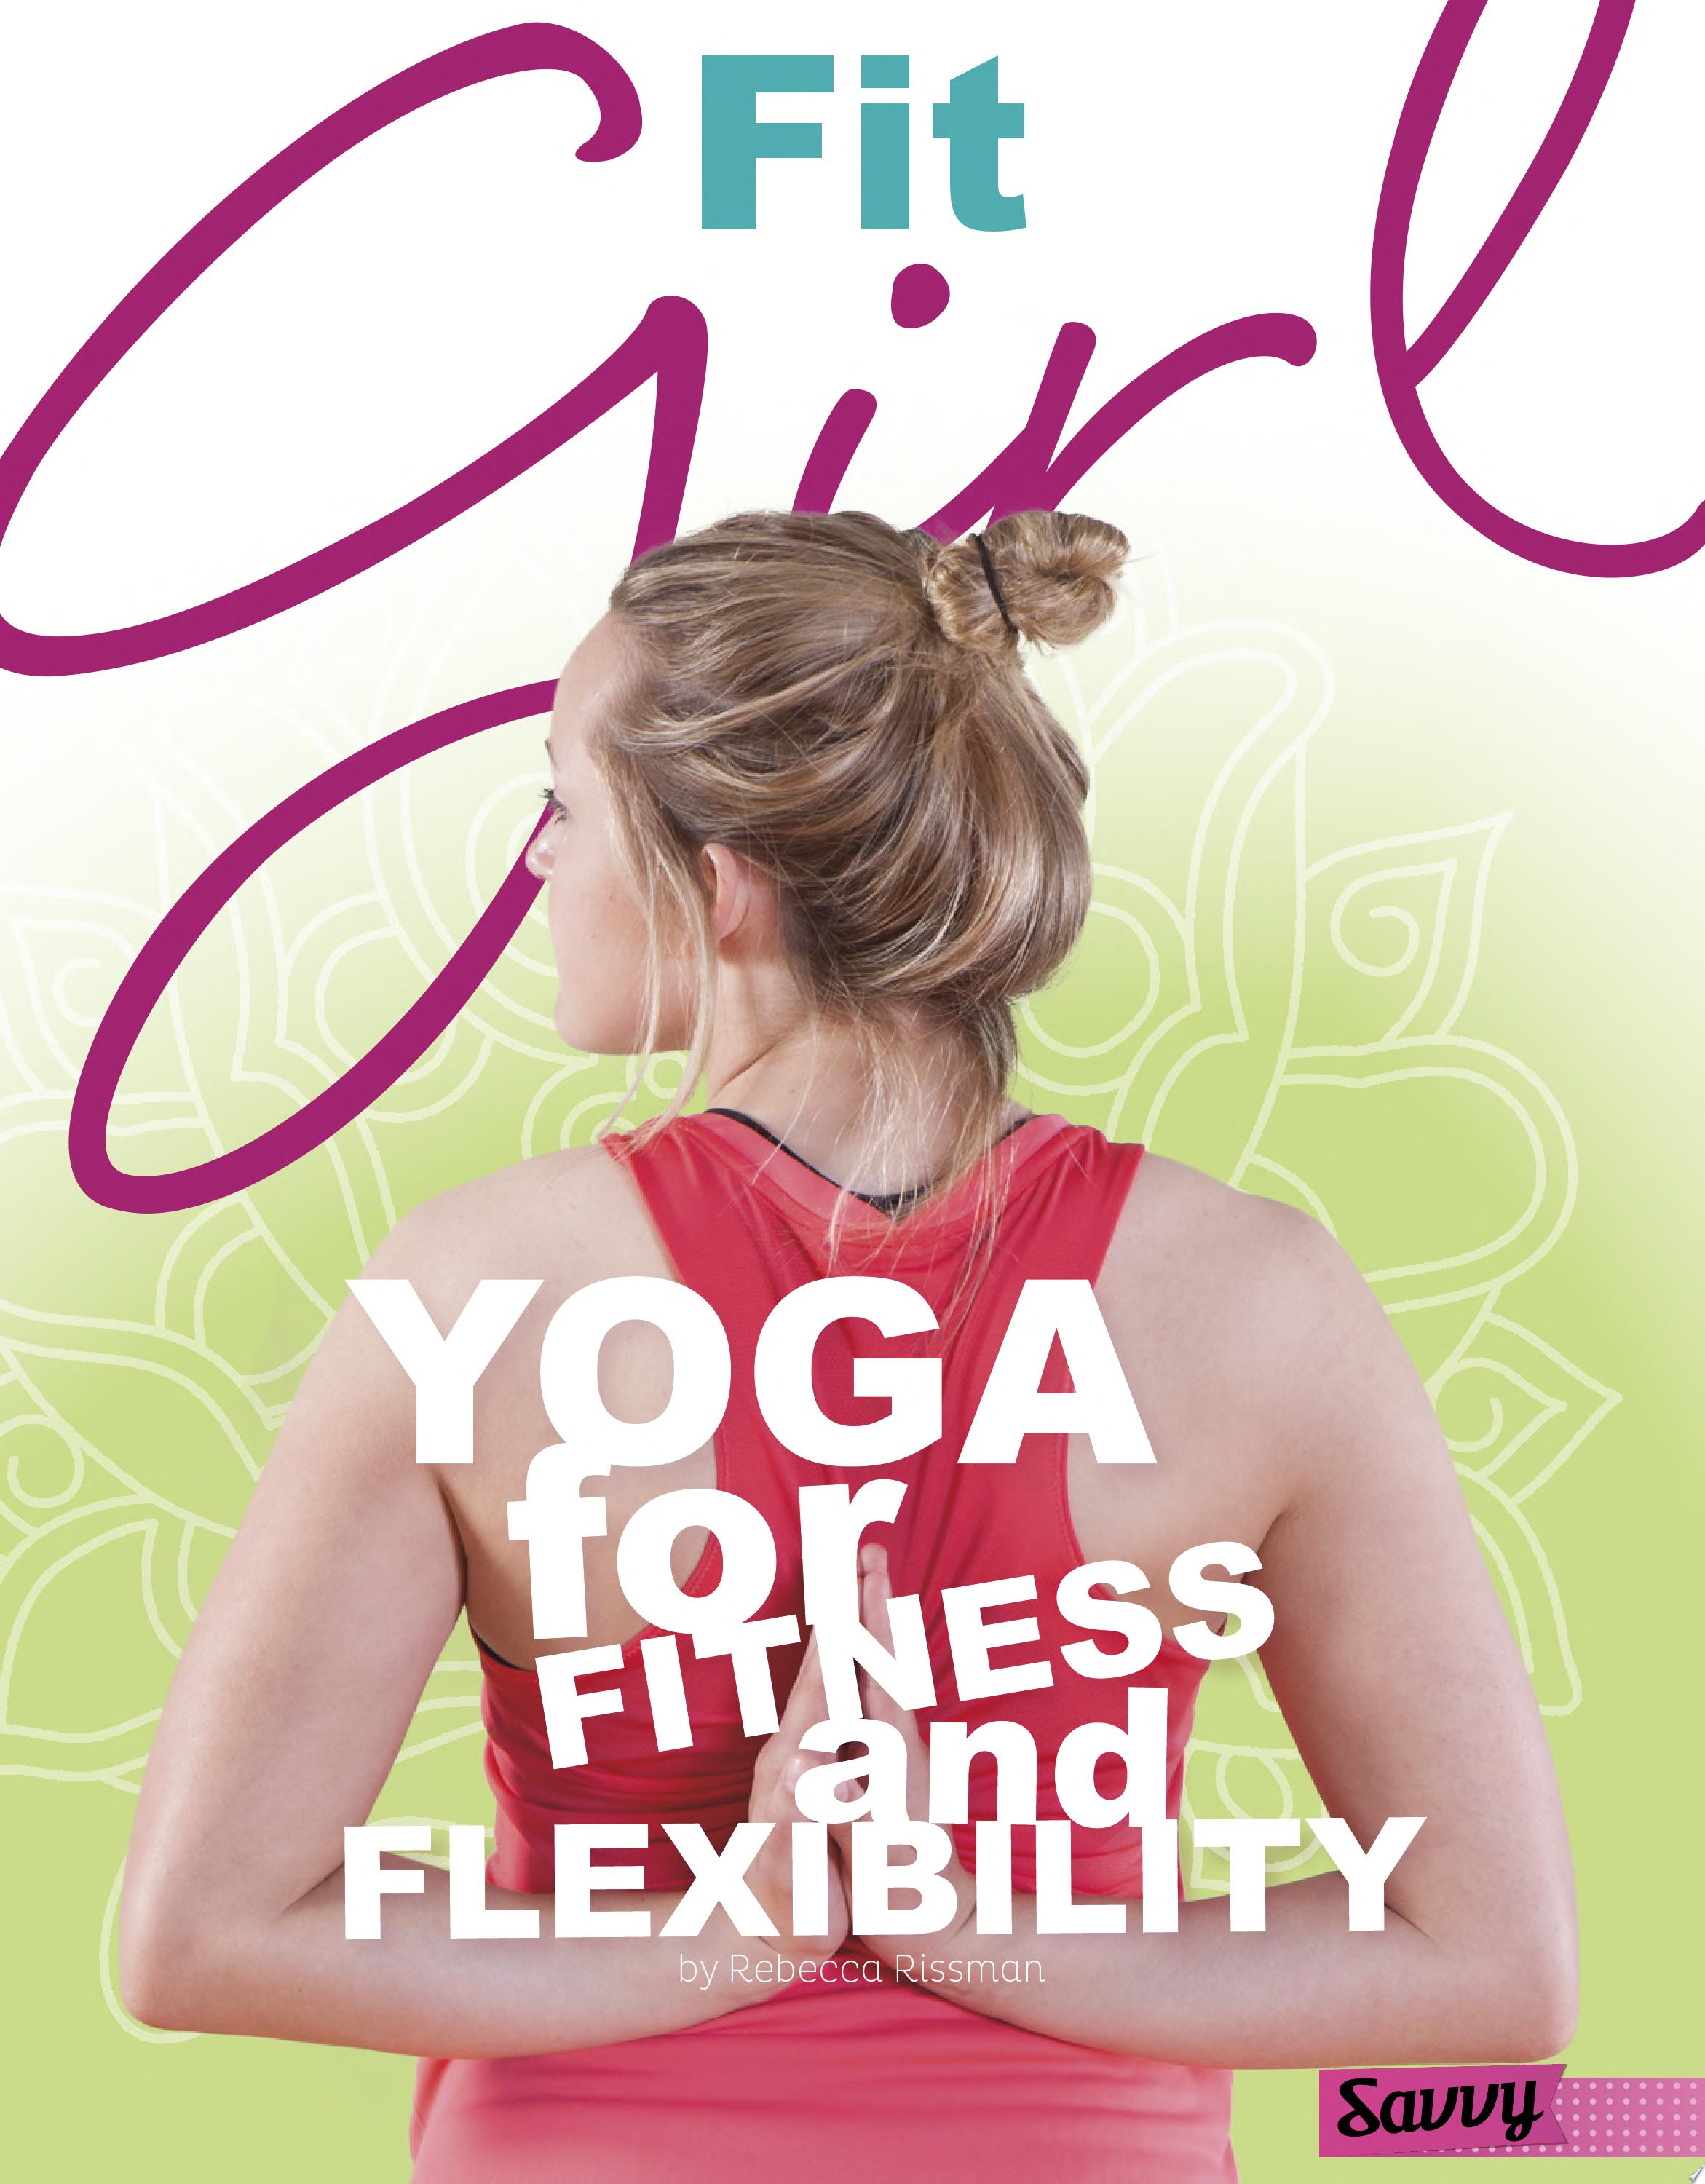 Image for "Fit Girl: yoga for fitness and flexibility"